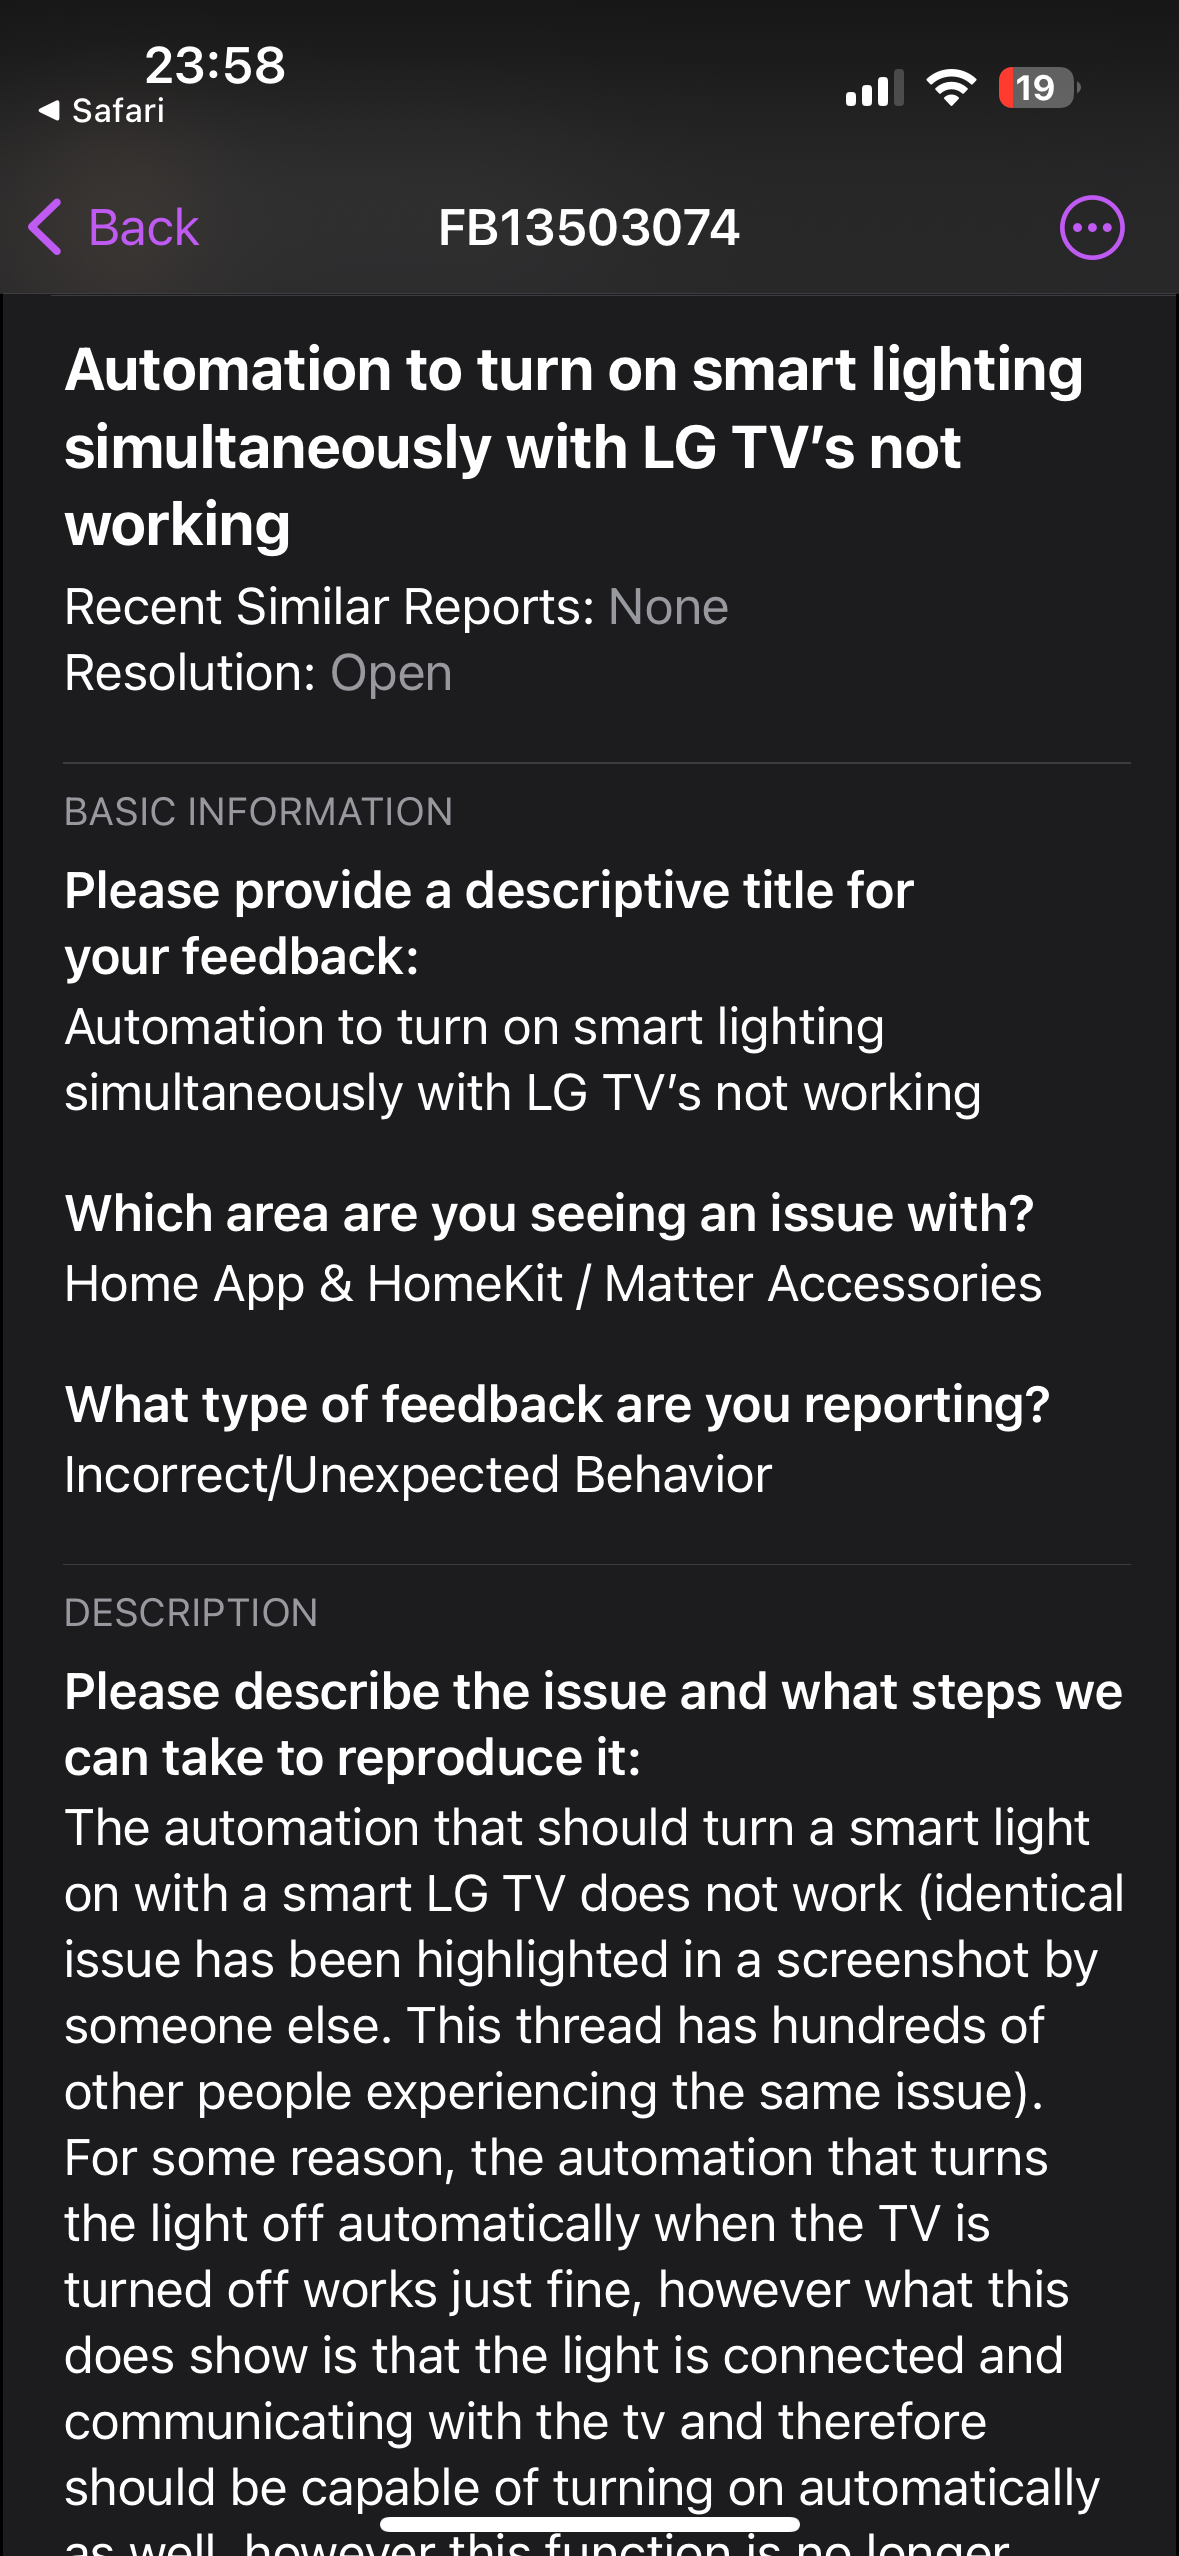 I am now convinced the HomeKit team are the rejects that weren't